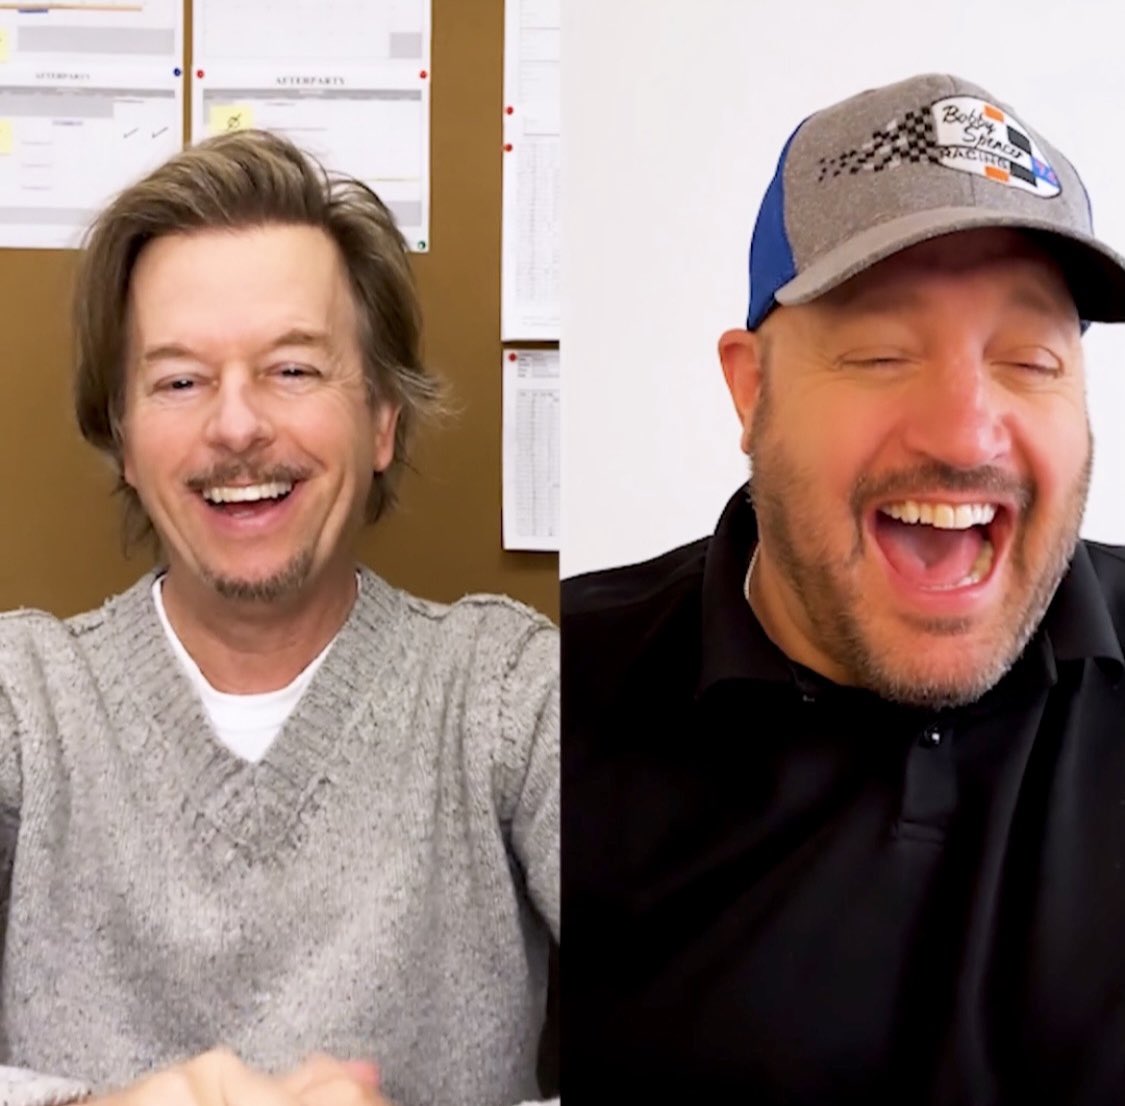 David Spade on Twitter: "I with my buddy Kevin James about everything from his new show THE CREW to the rope swing in GROWN UPS @KevinJames @NetflixIsAJoke https://t.co/0FUuzYH2nu /